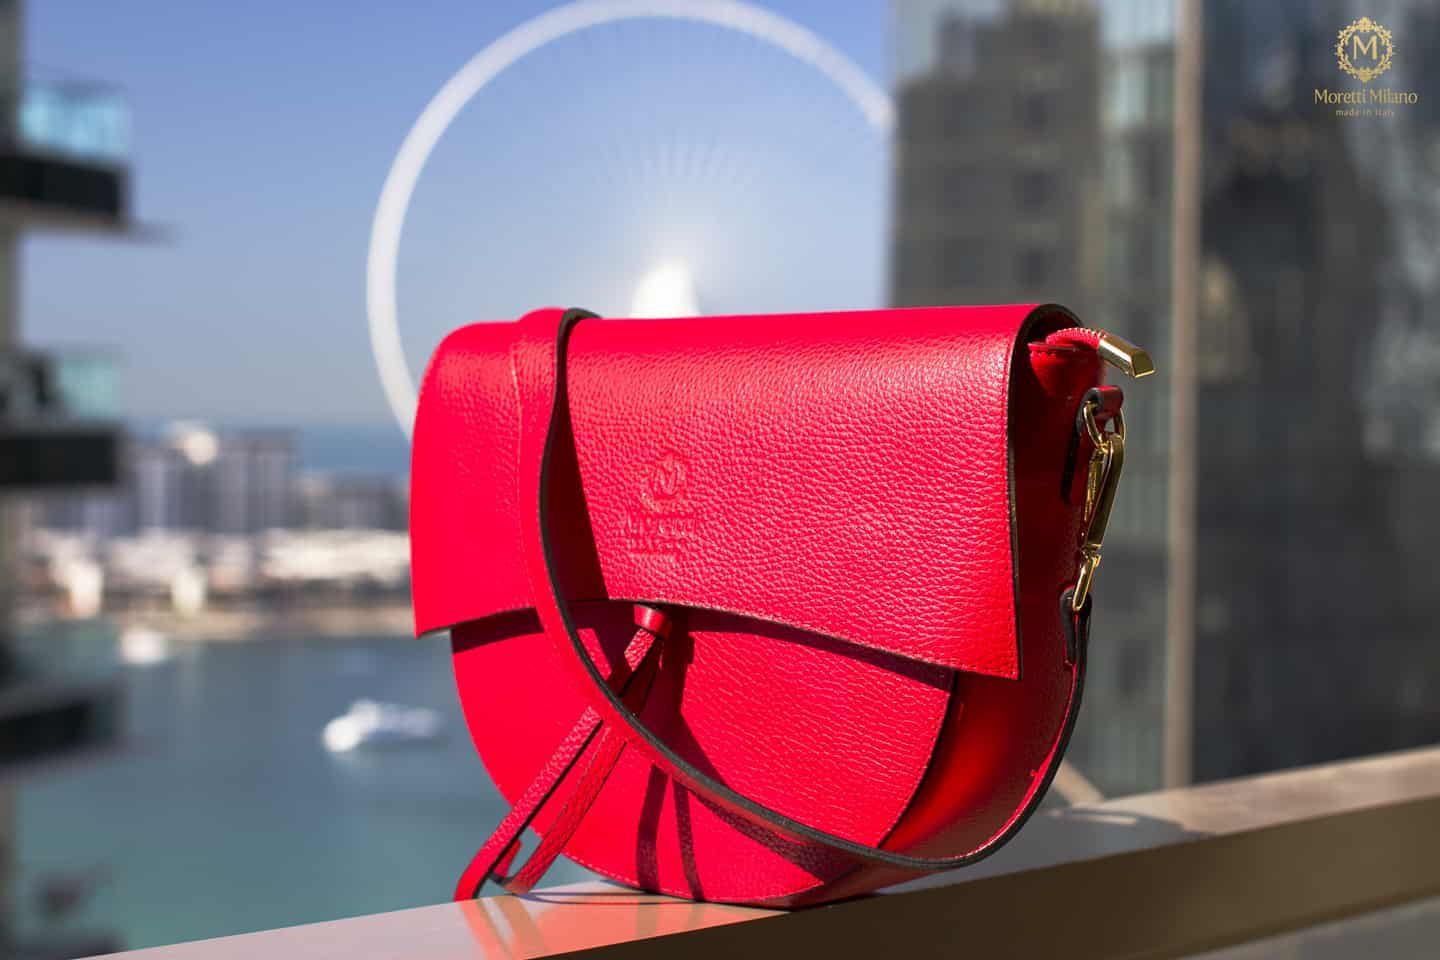 Adria handbag in luxury leather by Moretti Milano Italy 14459 red